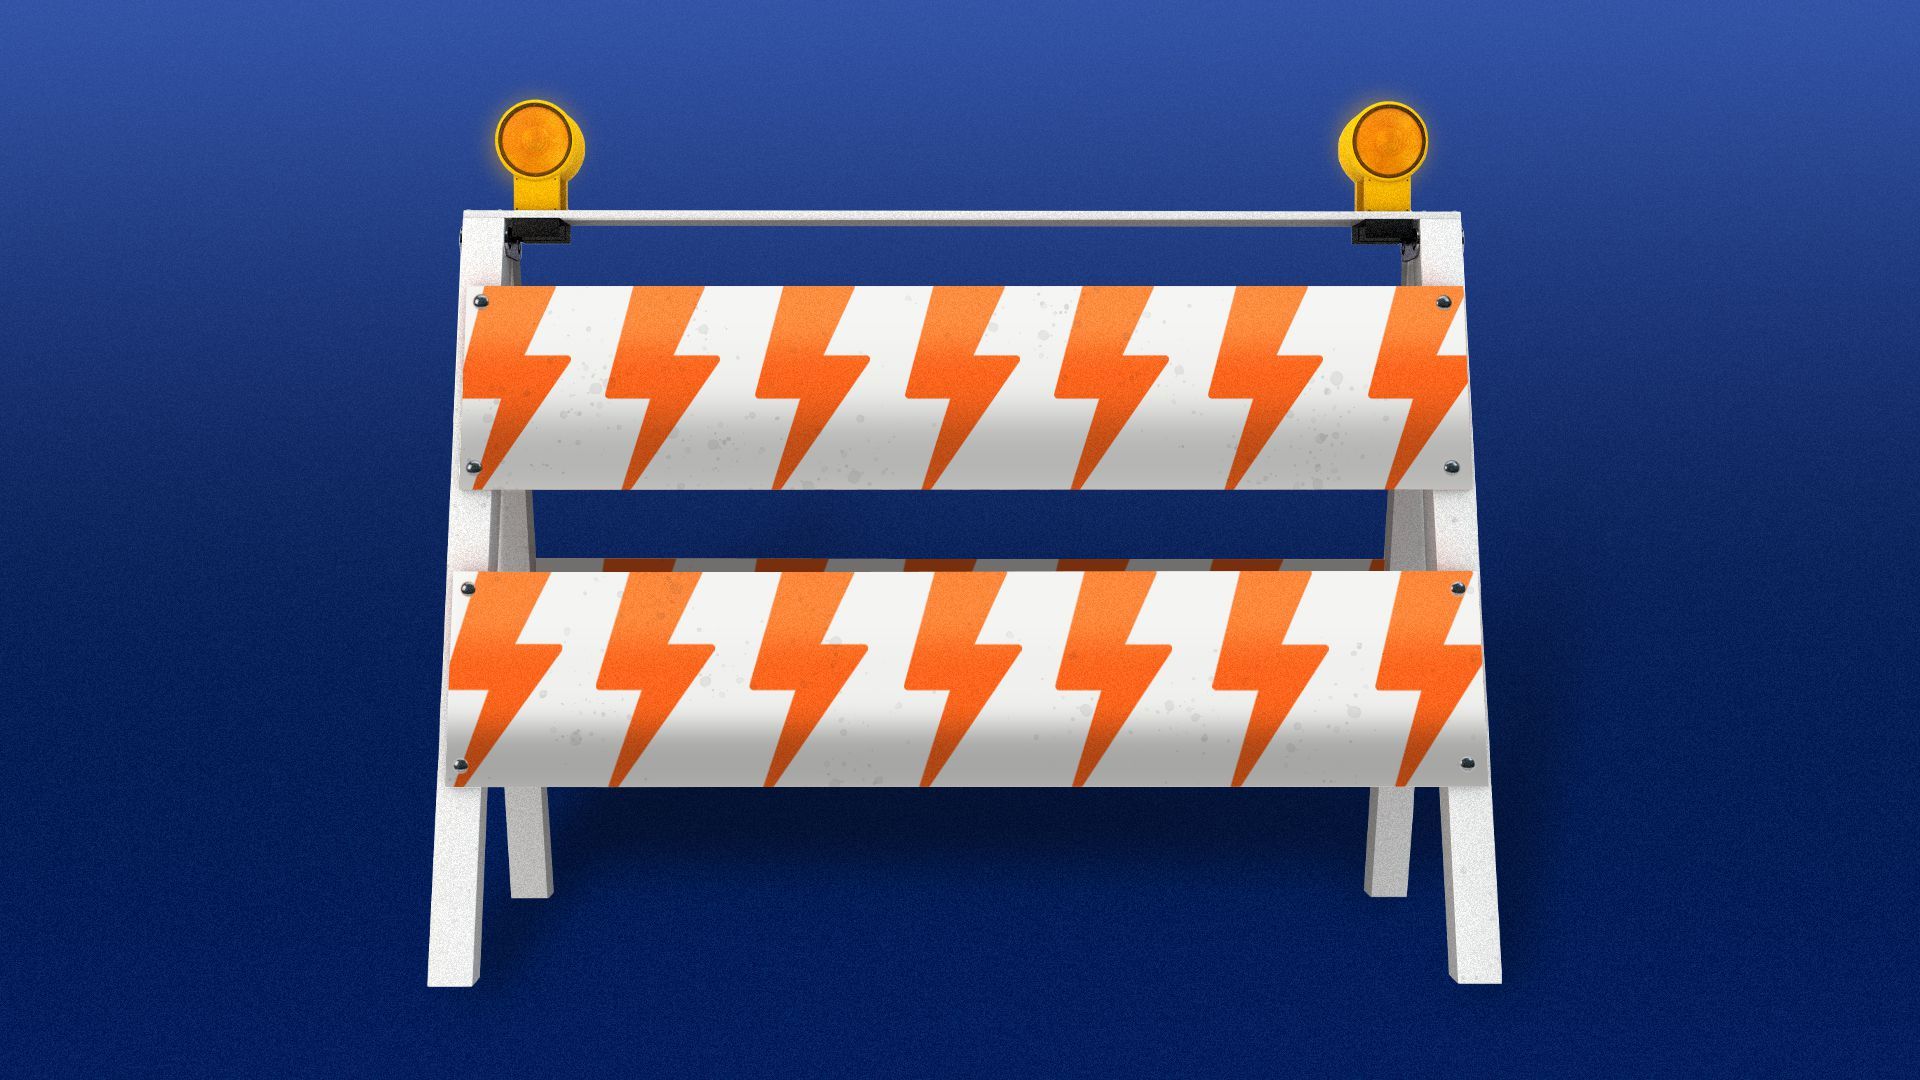 Illustration of a road barrier with lightning bolts for stripes